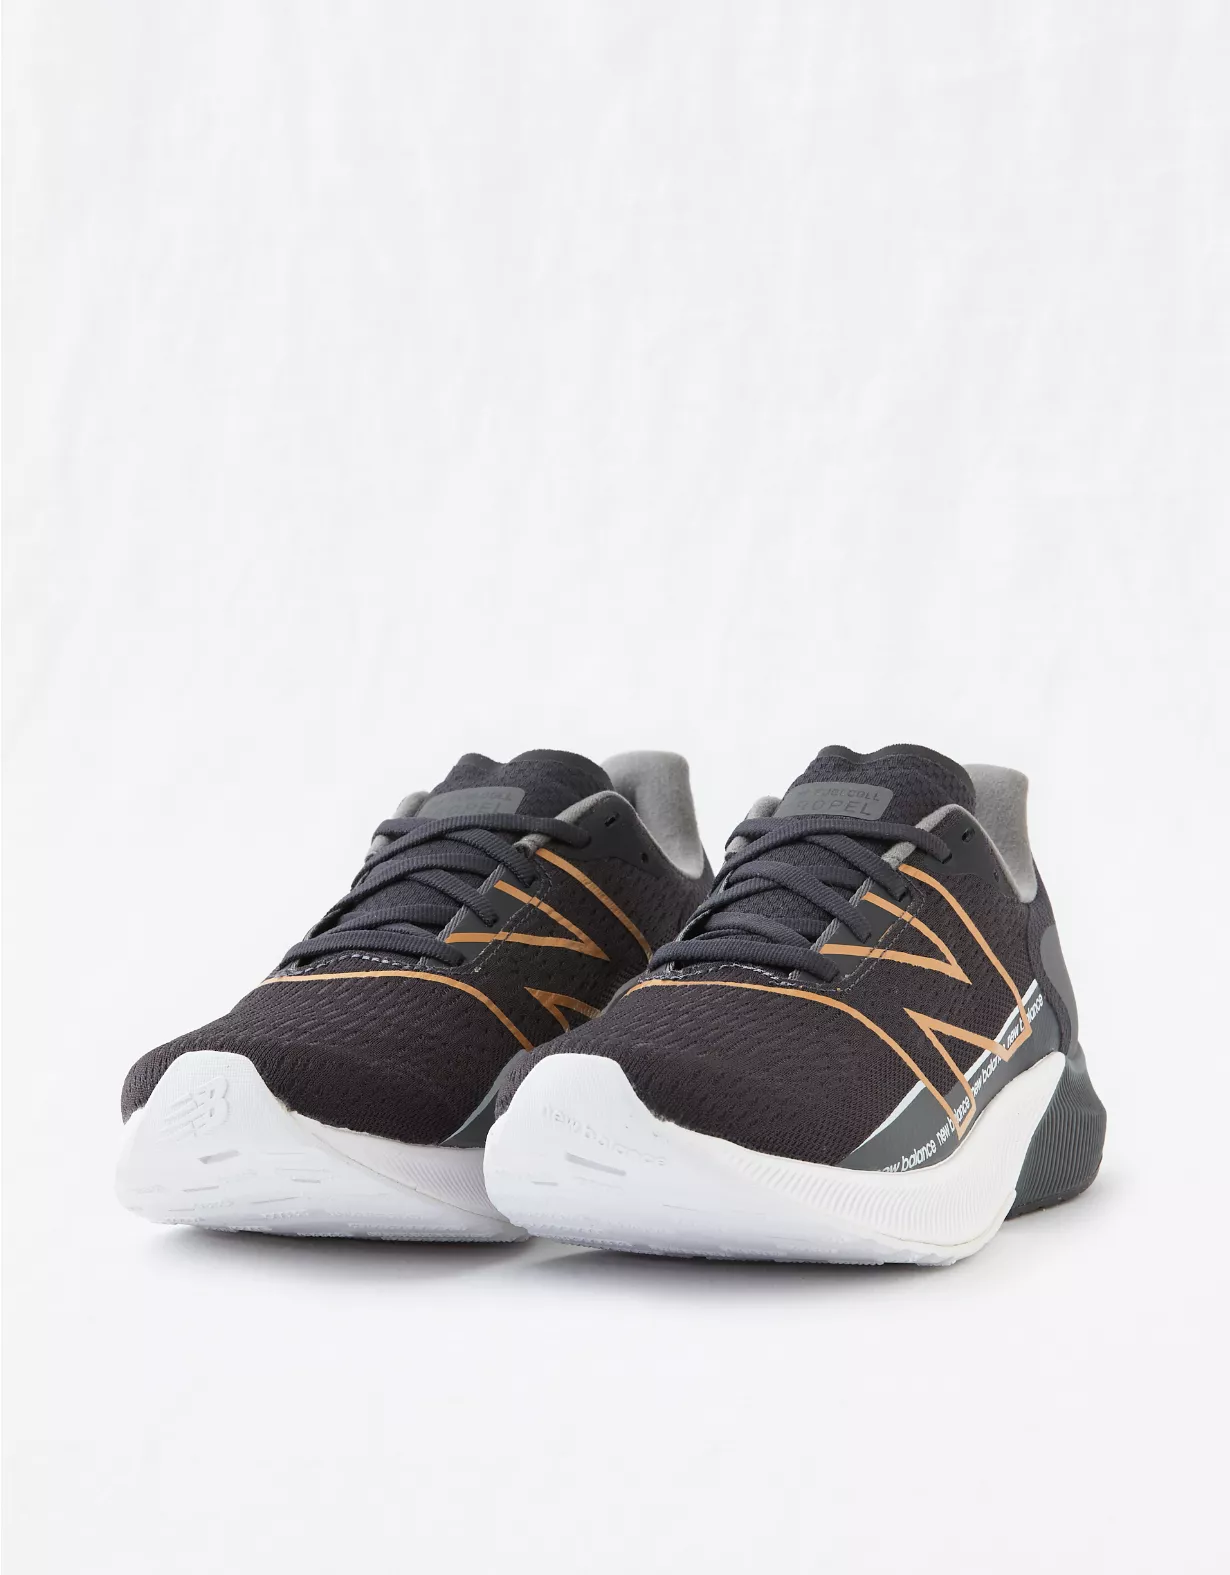 New Balance Fuelcell Propel V2 Sneaker